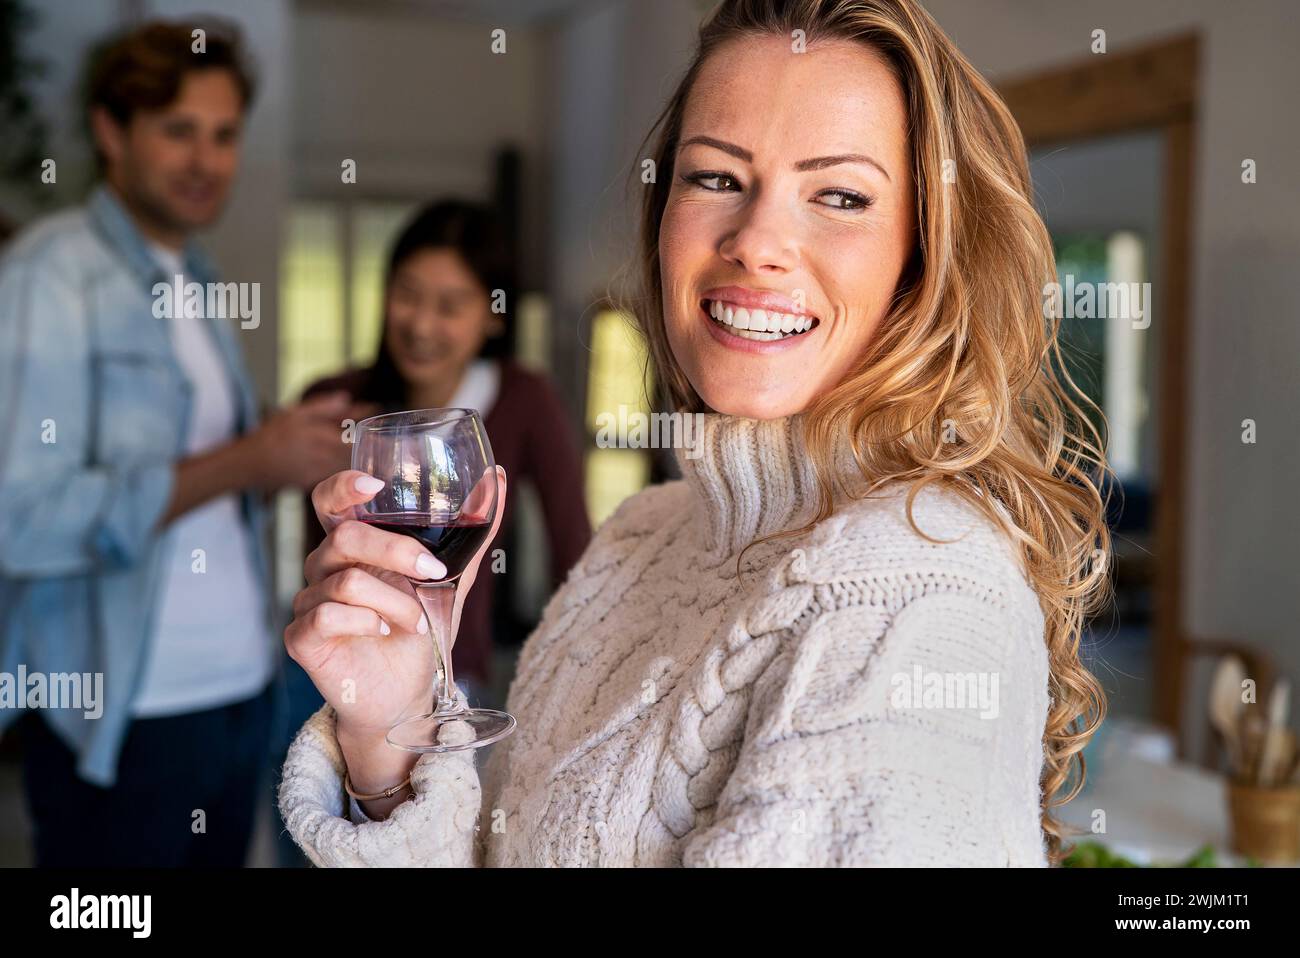 Confident woman holding wineglass while gathered with friends at party Stock Photo